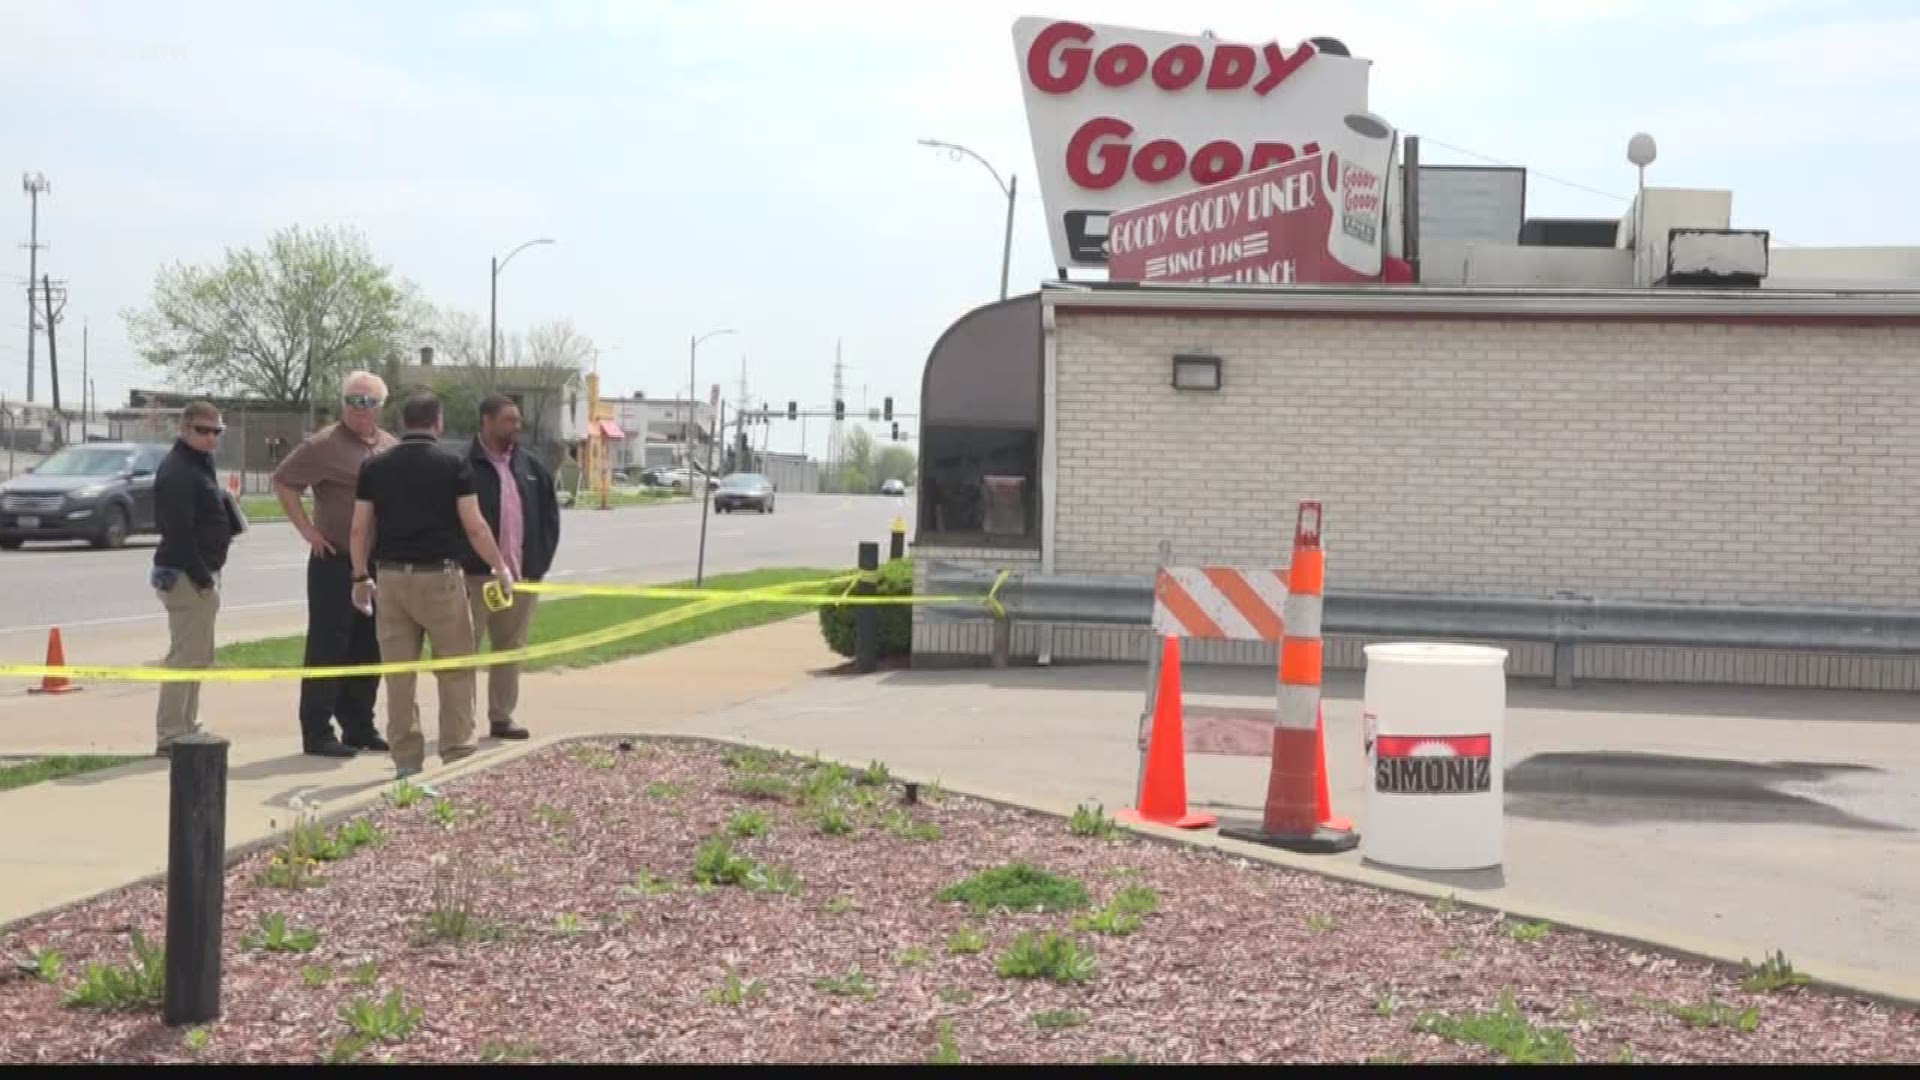 It's a St. Louis staple in business for more than seven decades. But it is closed after a fire damaged the interior.